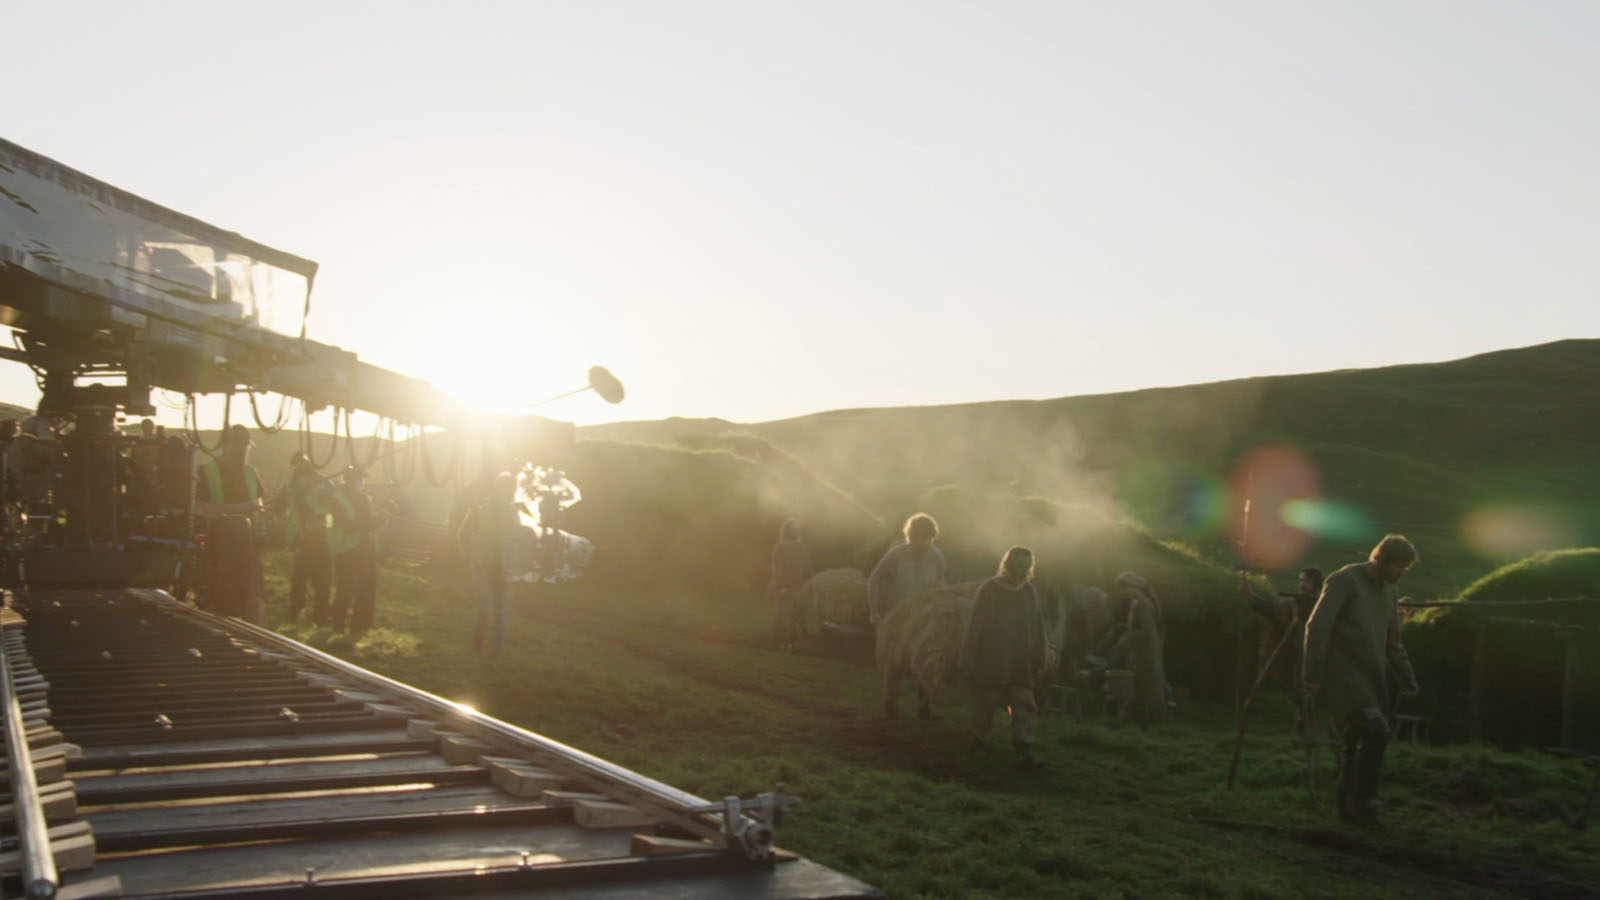 Capturing the dawn light with a massive dolly shot. Image © Focus Features